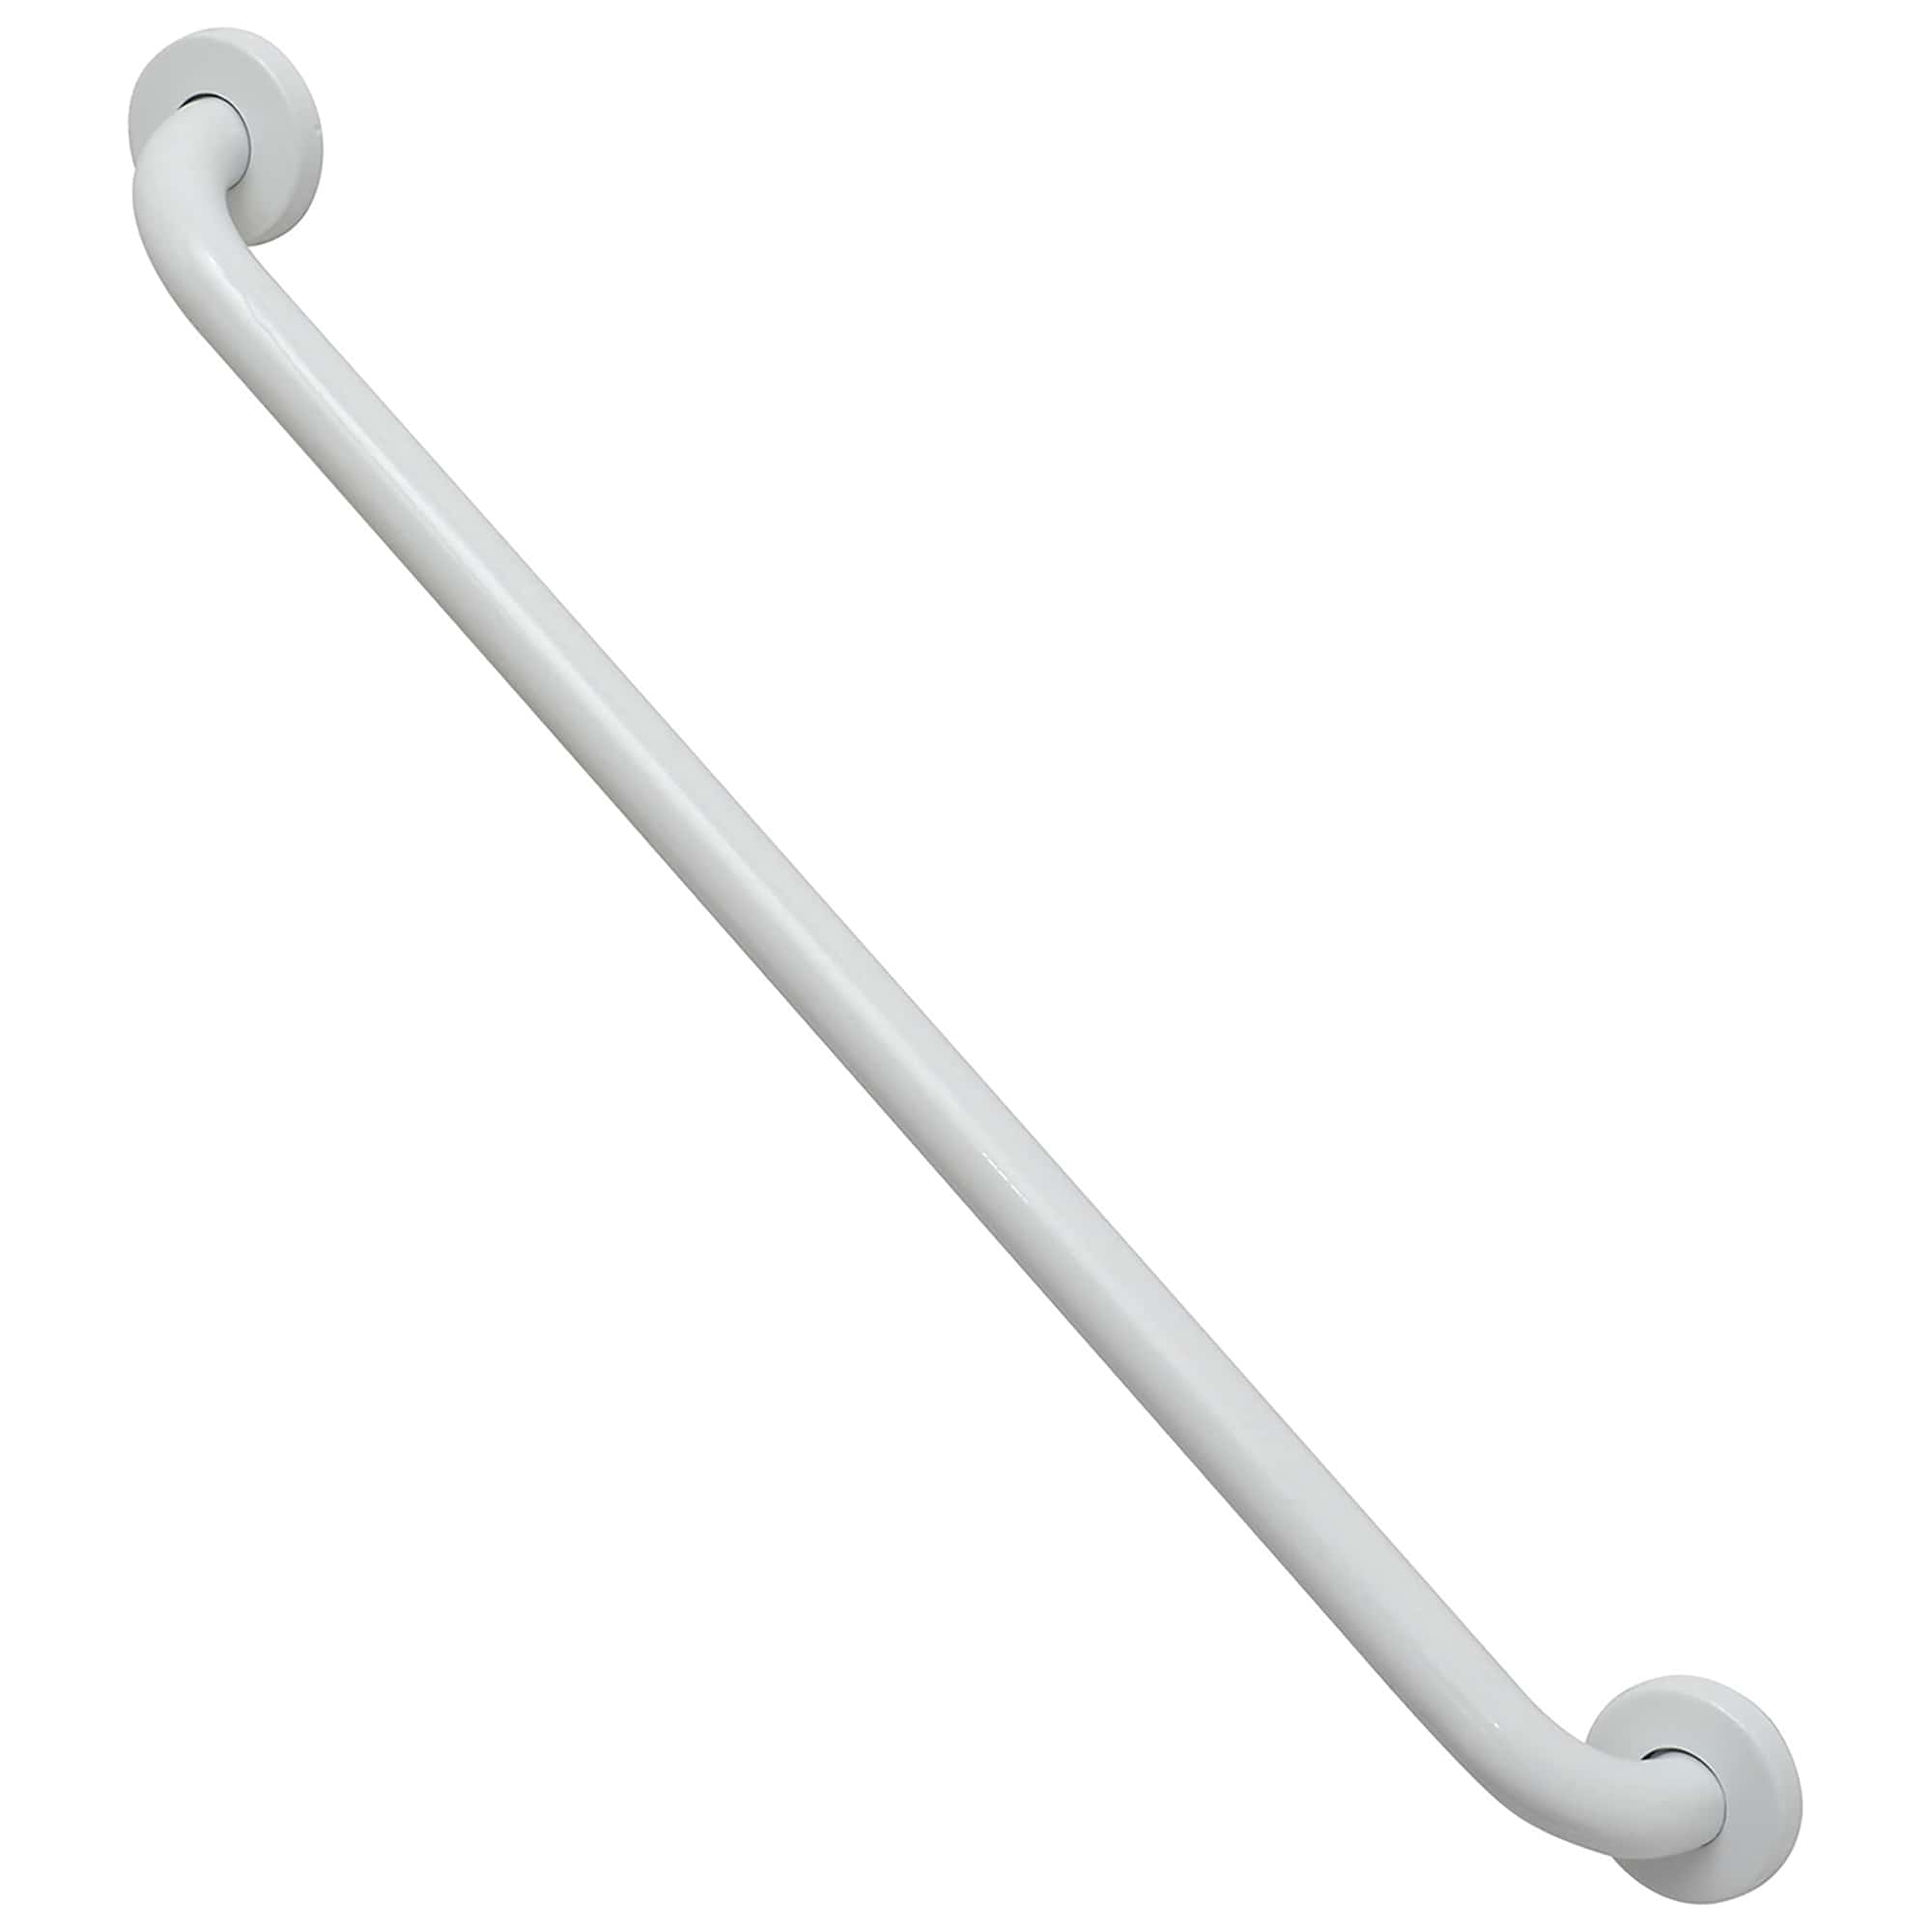 Stainless-Steel-Bath-and-Shower-Straight-Grab-Bar-Concealed-Mounting-Snap-Flange-1-Diameter-x-23.6-Lengt-White